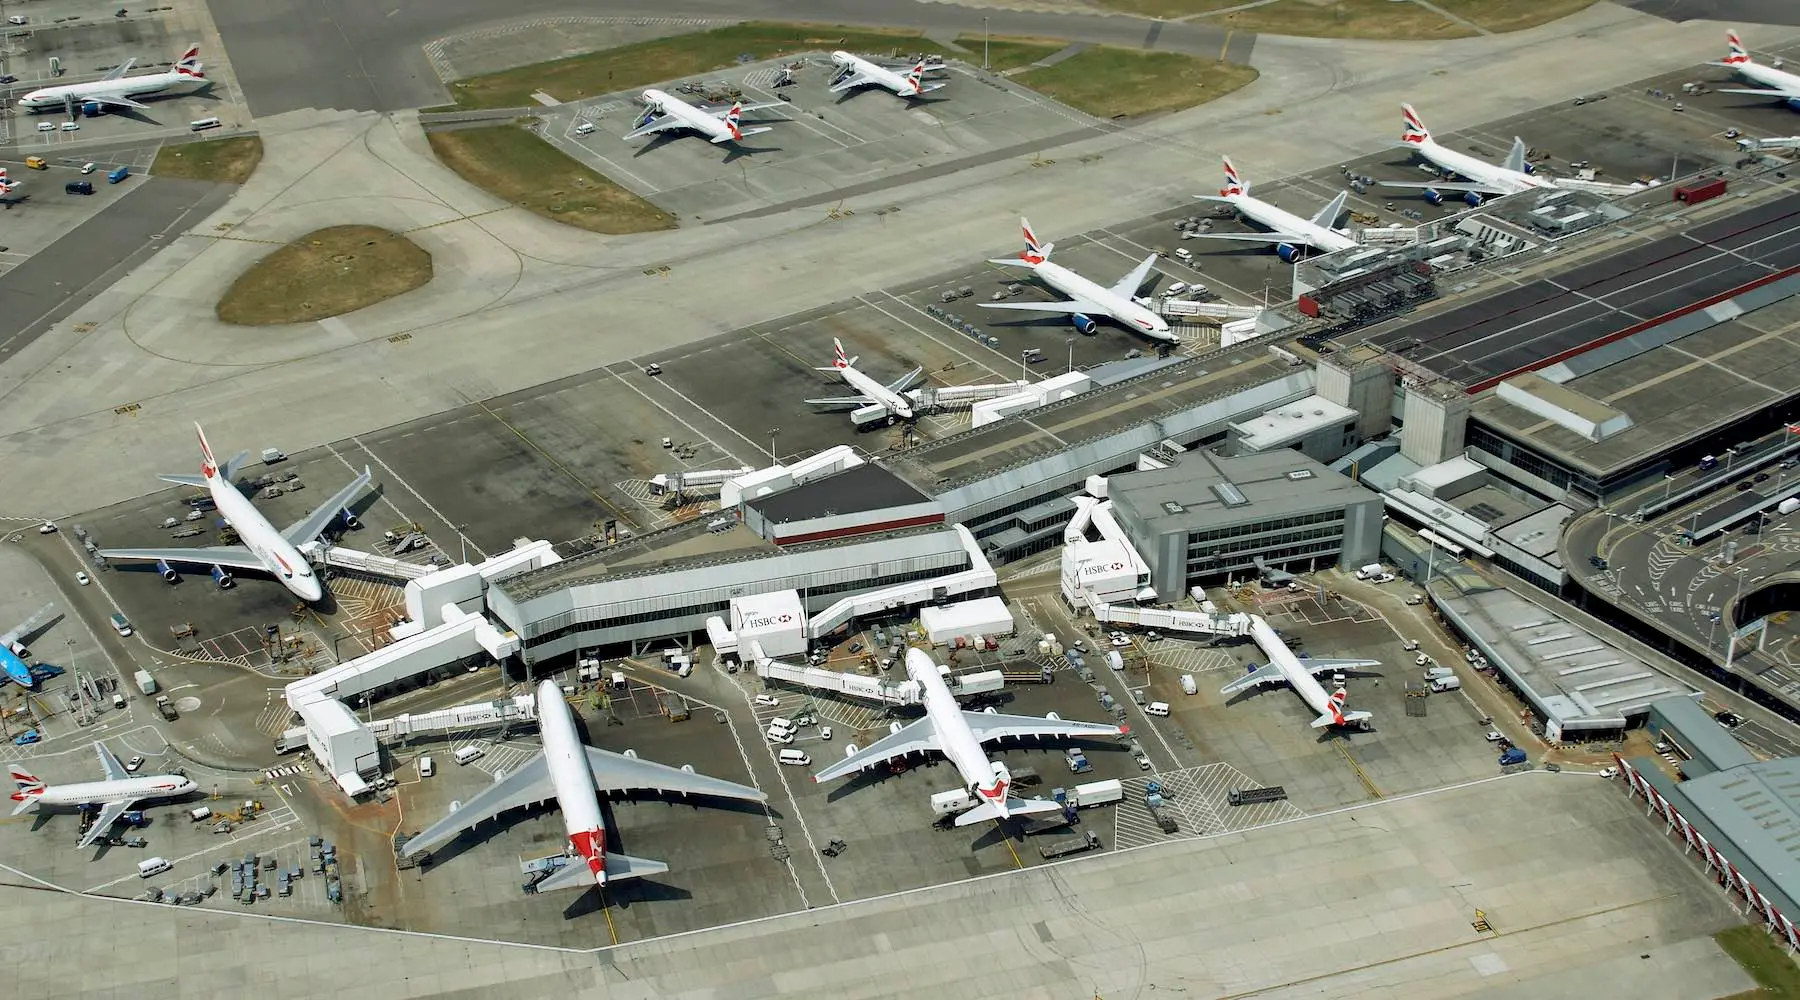 Aerial view of planes waiting at Heathrow airport.